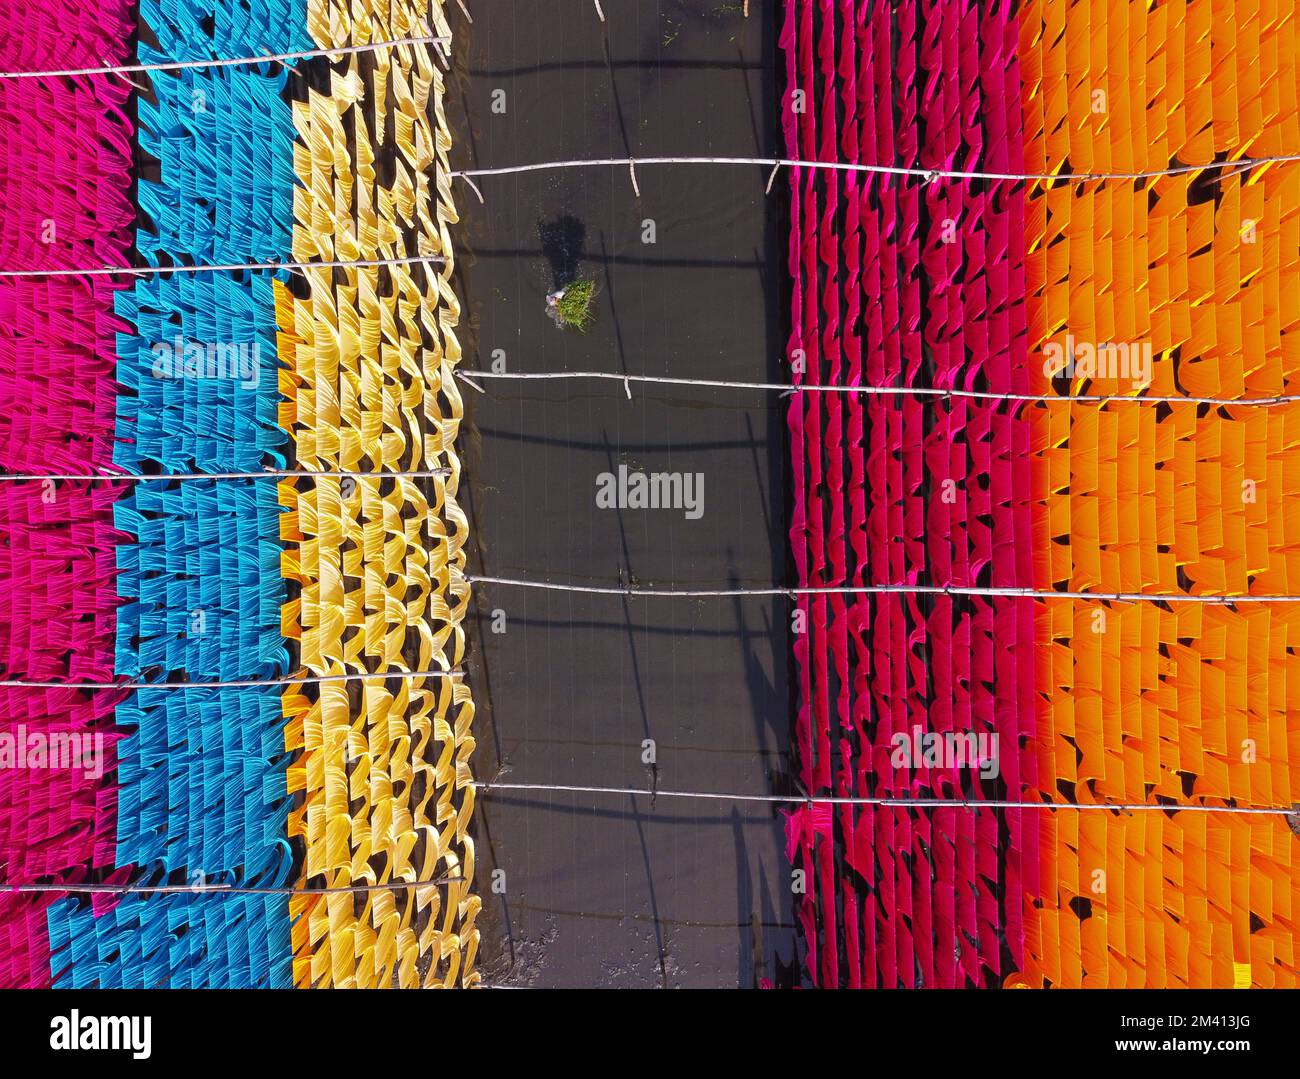 Narayanganj, Dhaka, Bangladesh. 18th Dec, 2022. A dazzling network of interlocking colors produces a rainbow of colors as colorful fabrics are hung to dry above a flooded field in Narayanganj, Bangladesh. Iron wires are used between a bamboo framework to create giant washing lines for the final part of the dying process after which the cloths are made into t-shirts and vests at the garment factory. About 4,000 pieces of fabric are hung to dry here every day. The process usually takes five hours, with each set of 80 pieces at a time. Credit: ZUMA Press, Inc./Alamy Live News Stock Photo